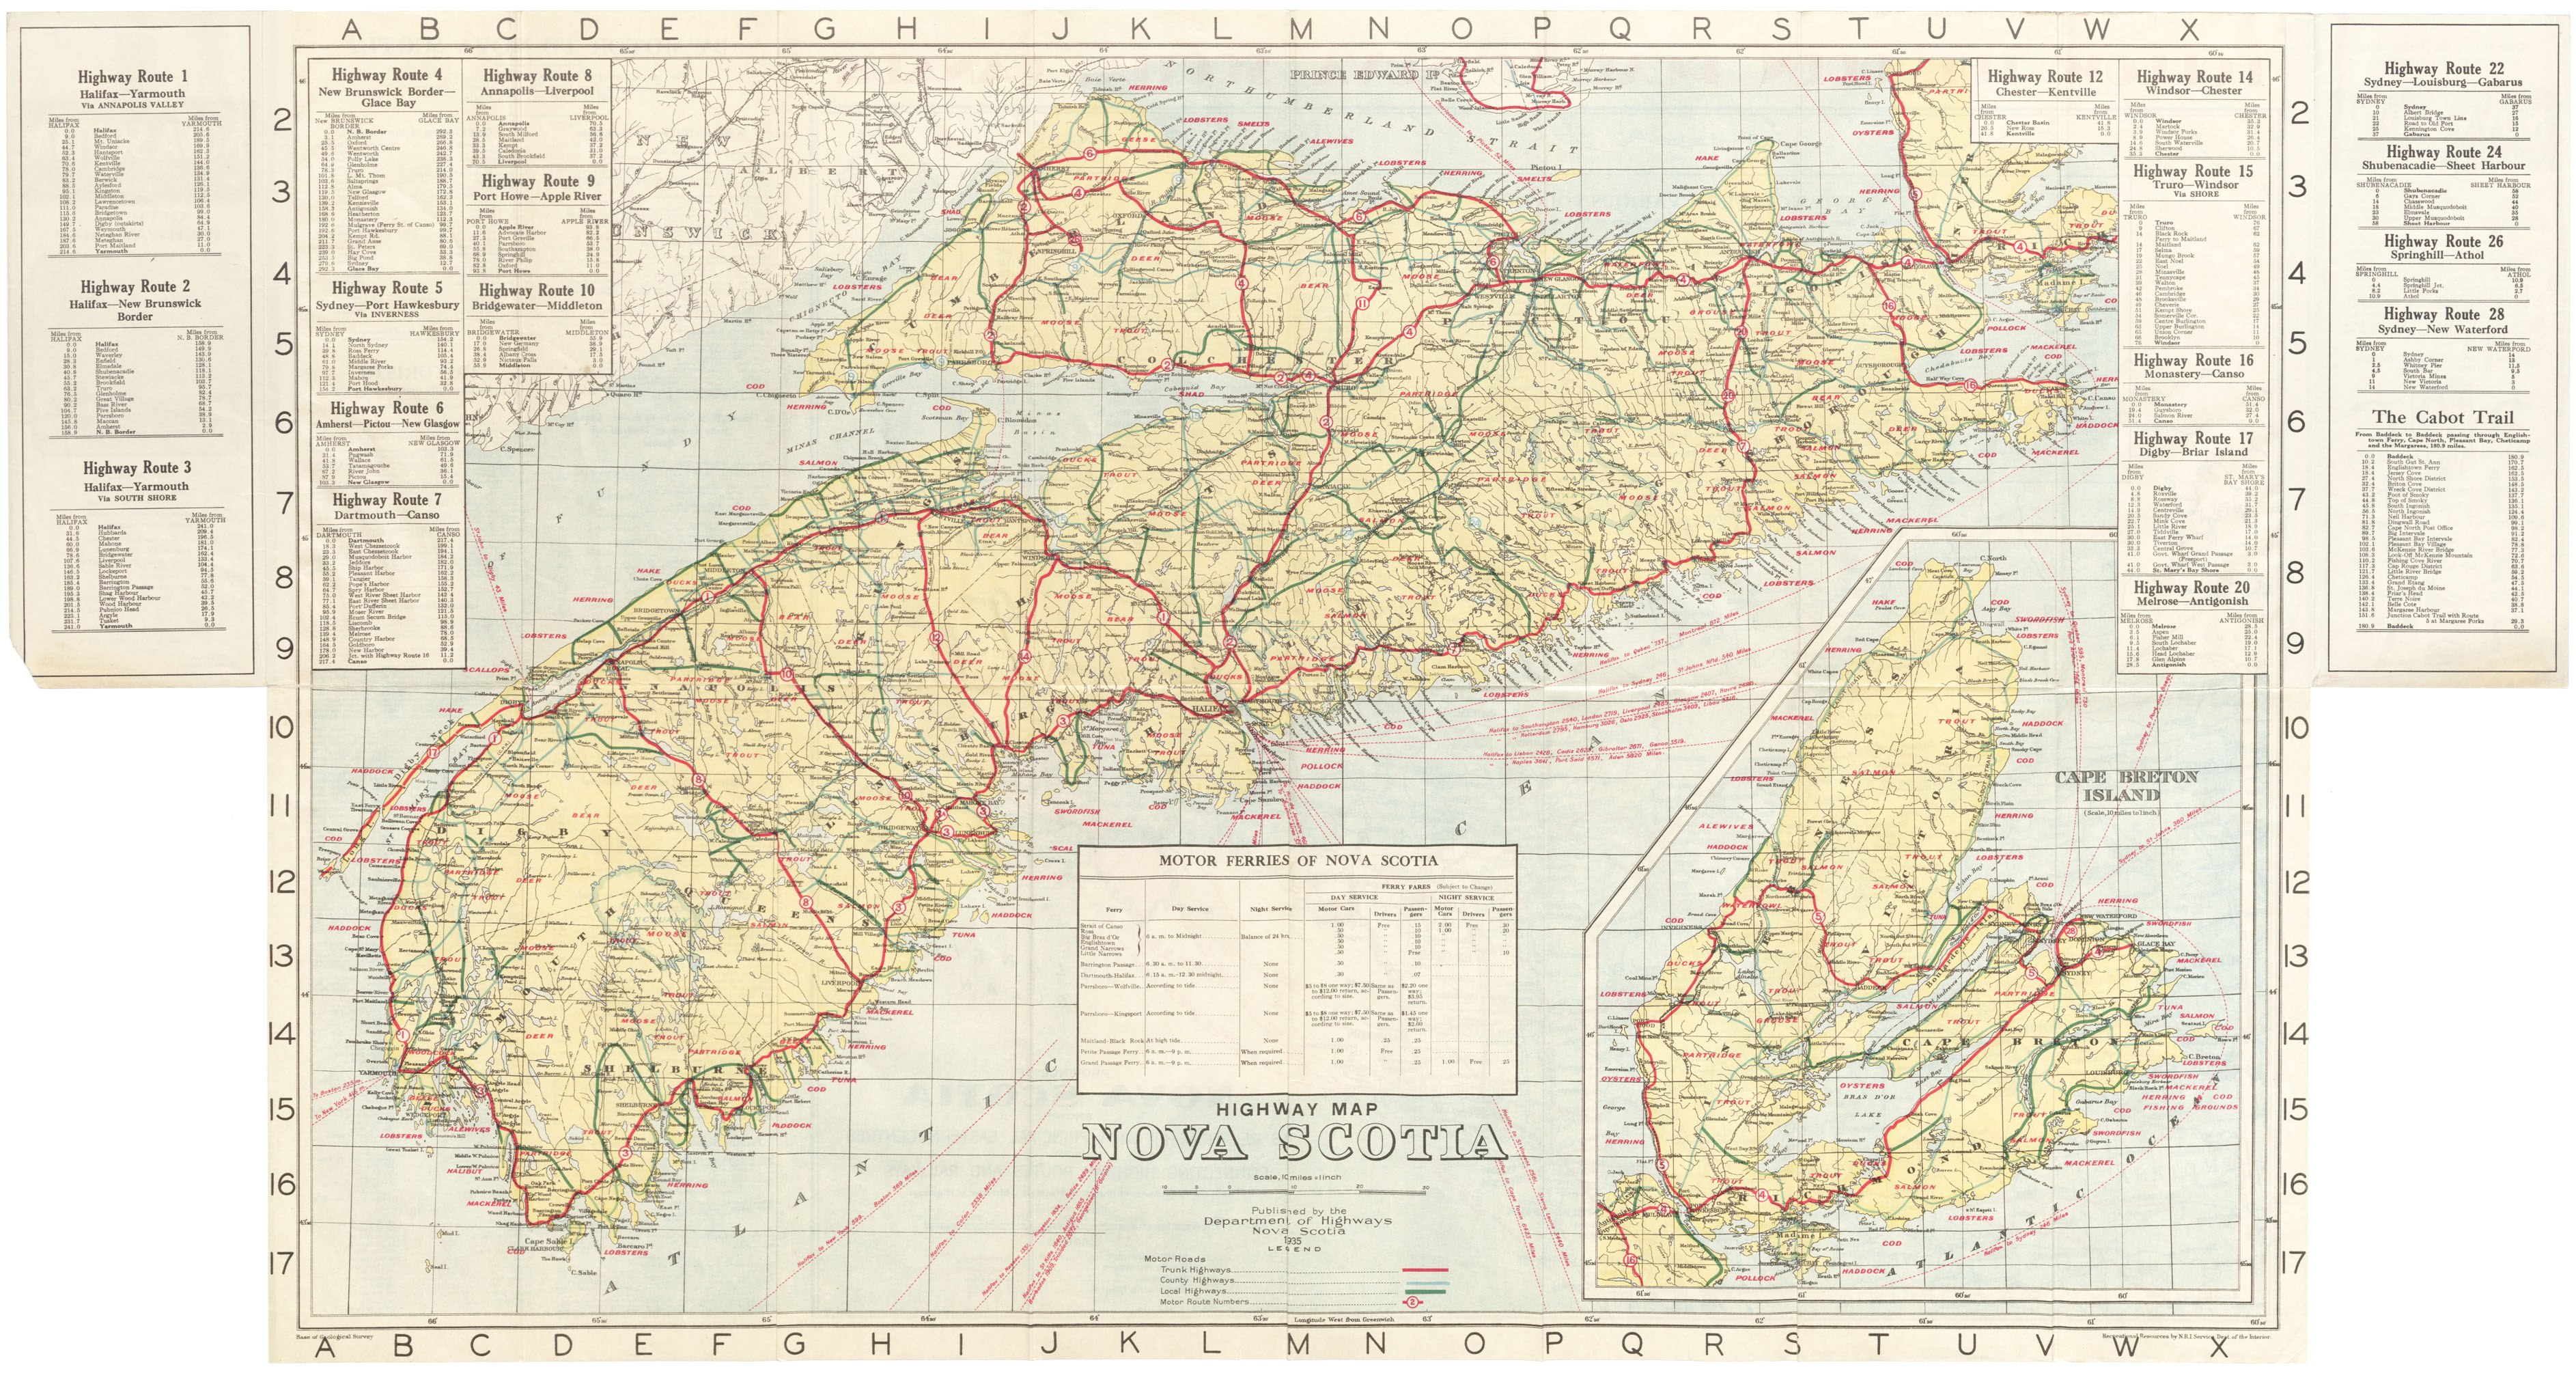 Official Highway Map, published by the Department of Highways, Nova Scotia